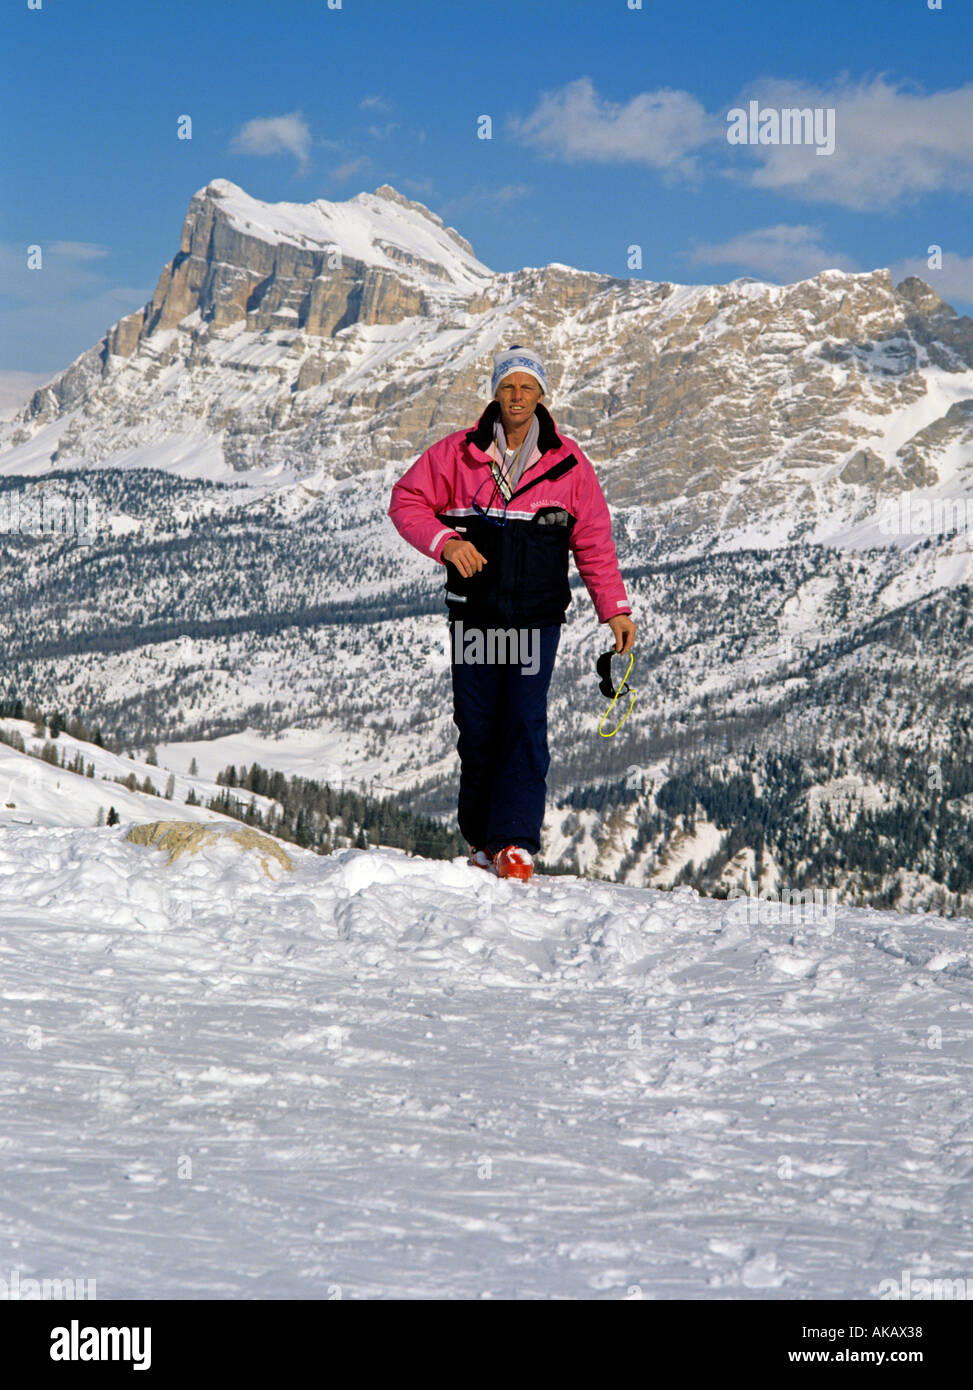 Person in ski wear walking in snow in the Dolomites Italy. On the Sella Ronda with snowy landscape behind Stock Photo